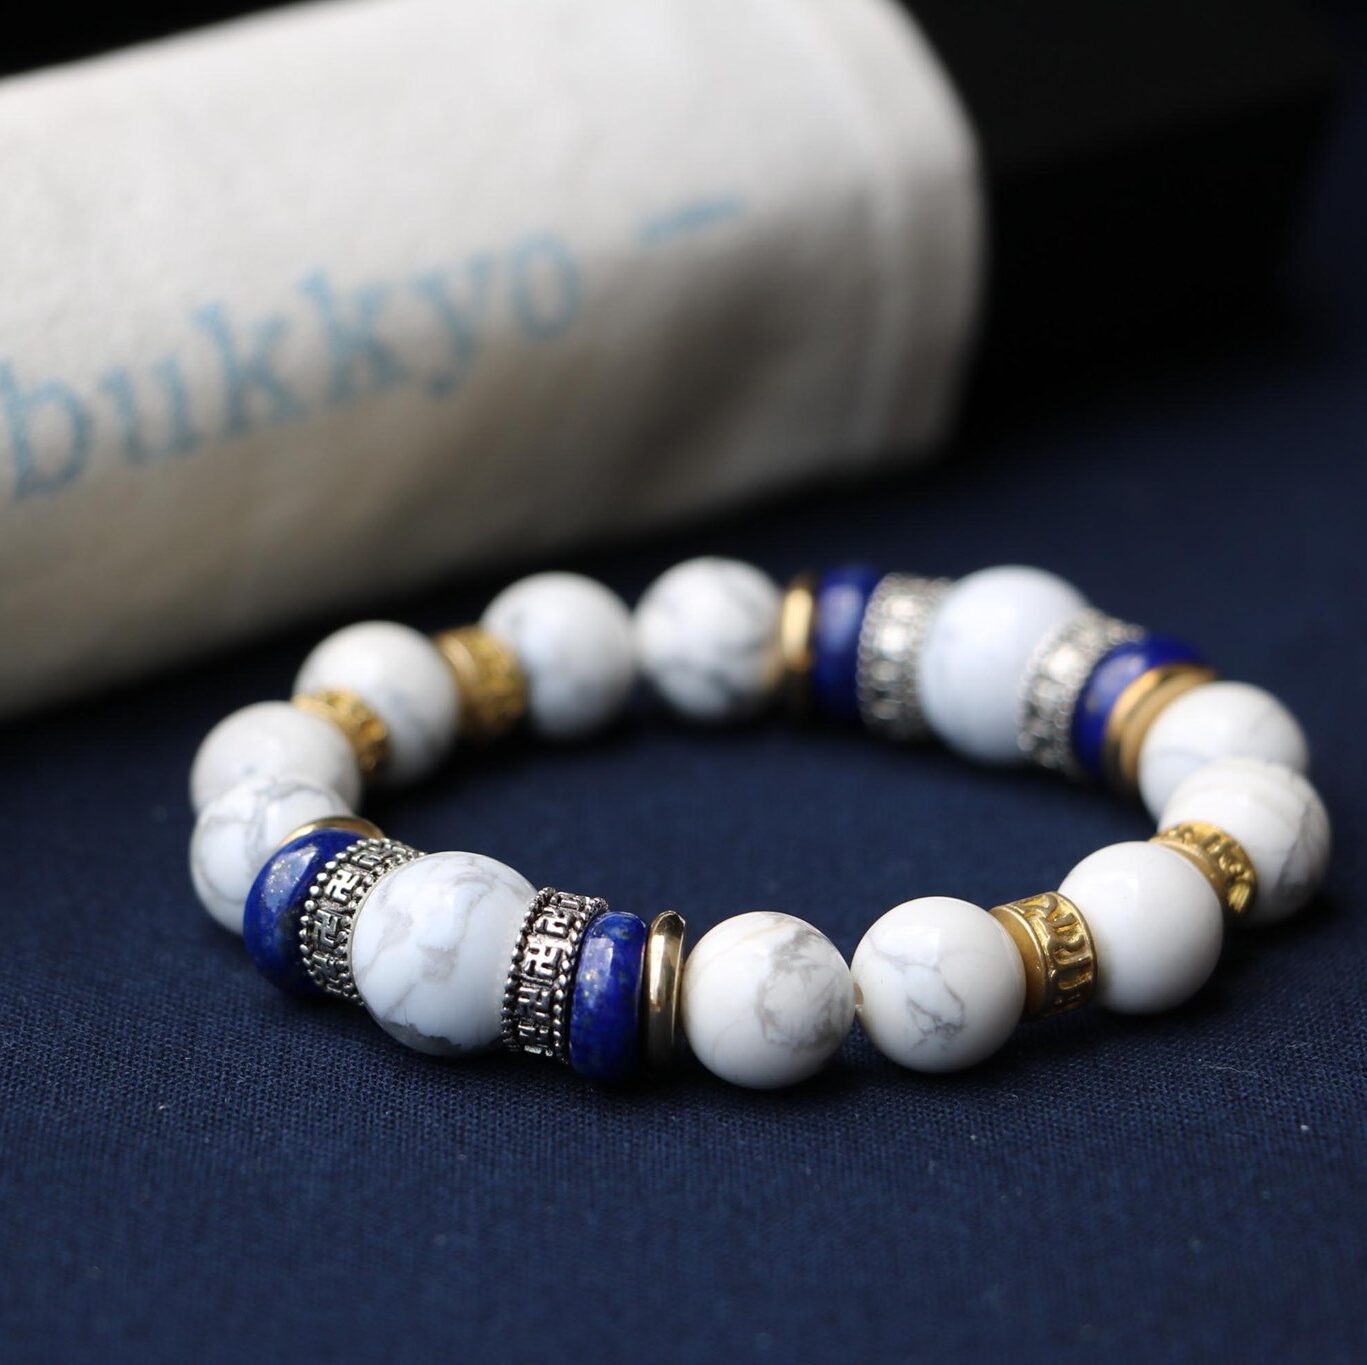 Taiwan Derong Collection｜Original undyed white turquoise hand beads 12mm｜Six-character proverb brass spacer